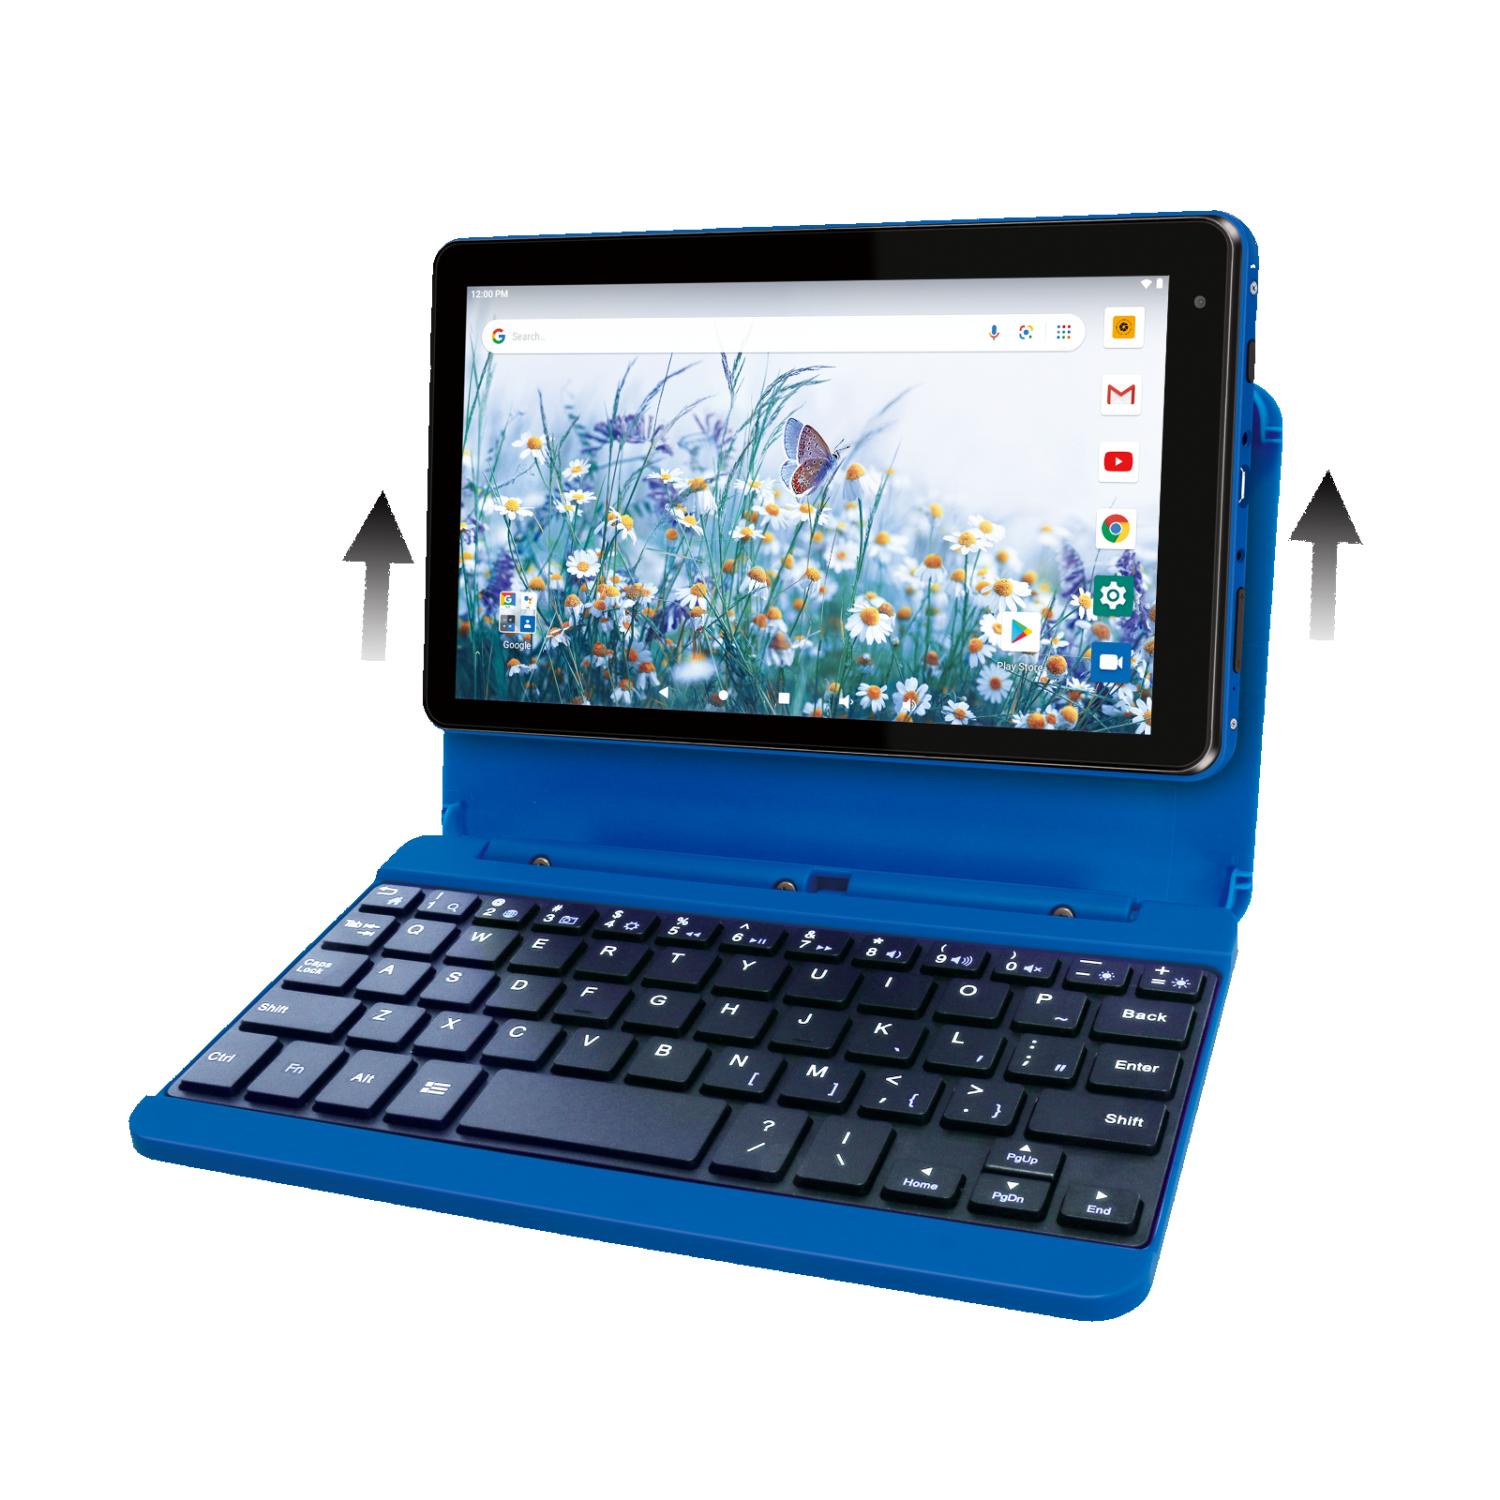 RCA Voyager Pro+ 7" Tablet 2GB RAM 16GB Storage with Removable Keyboard WiFi Touch Android 10 Blue